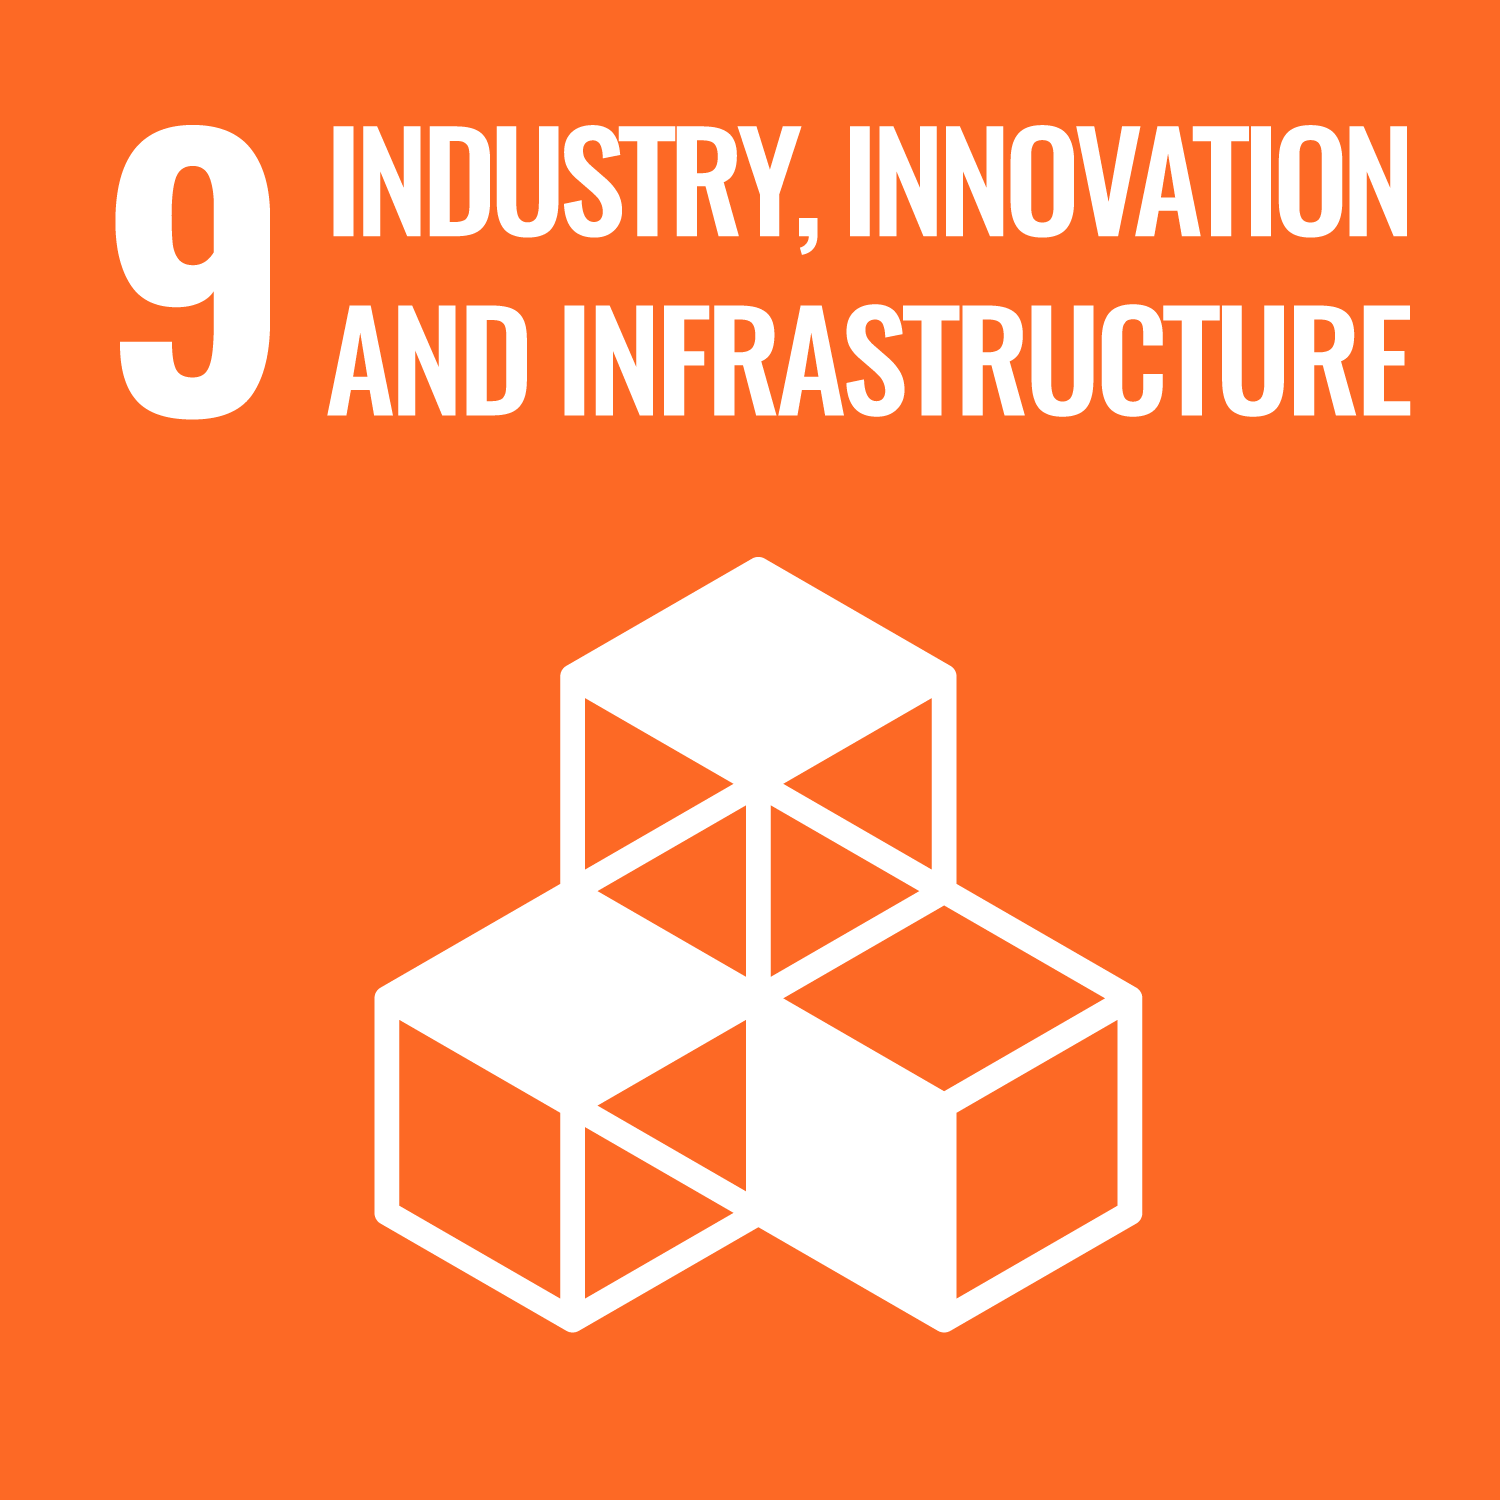 9：INDUSTRY, INNOVATION AND INFRASTRUCTURE